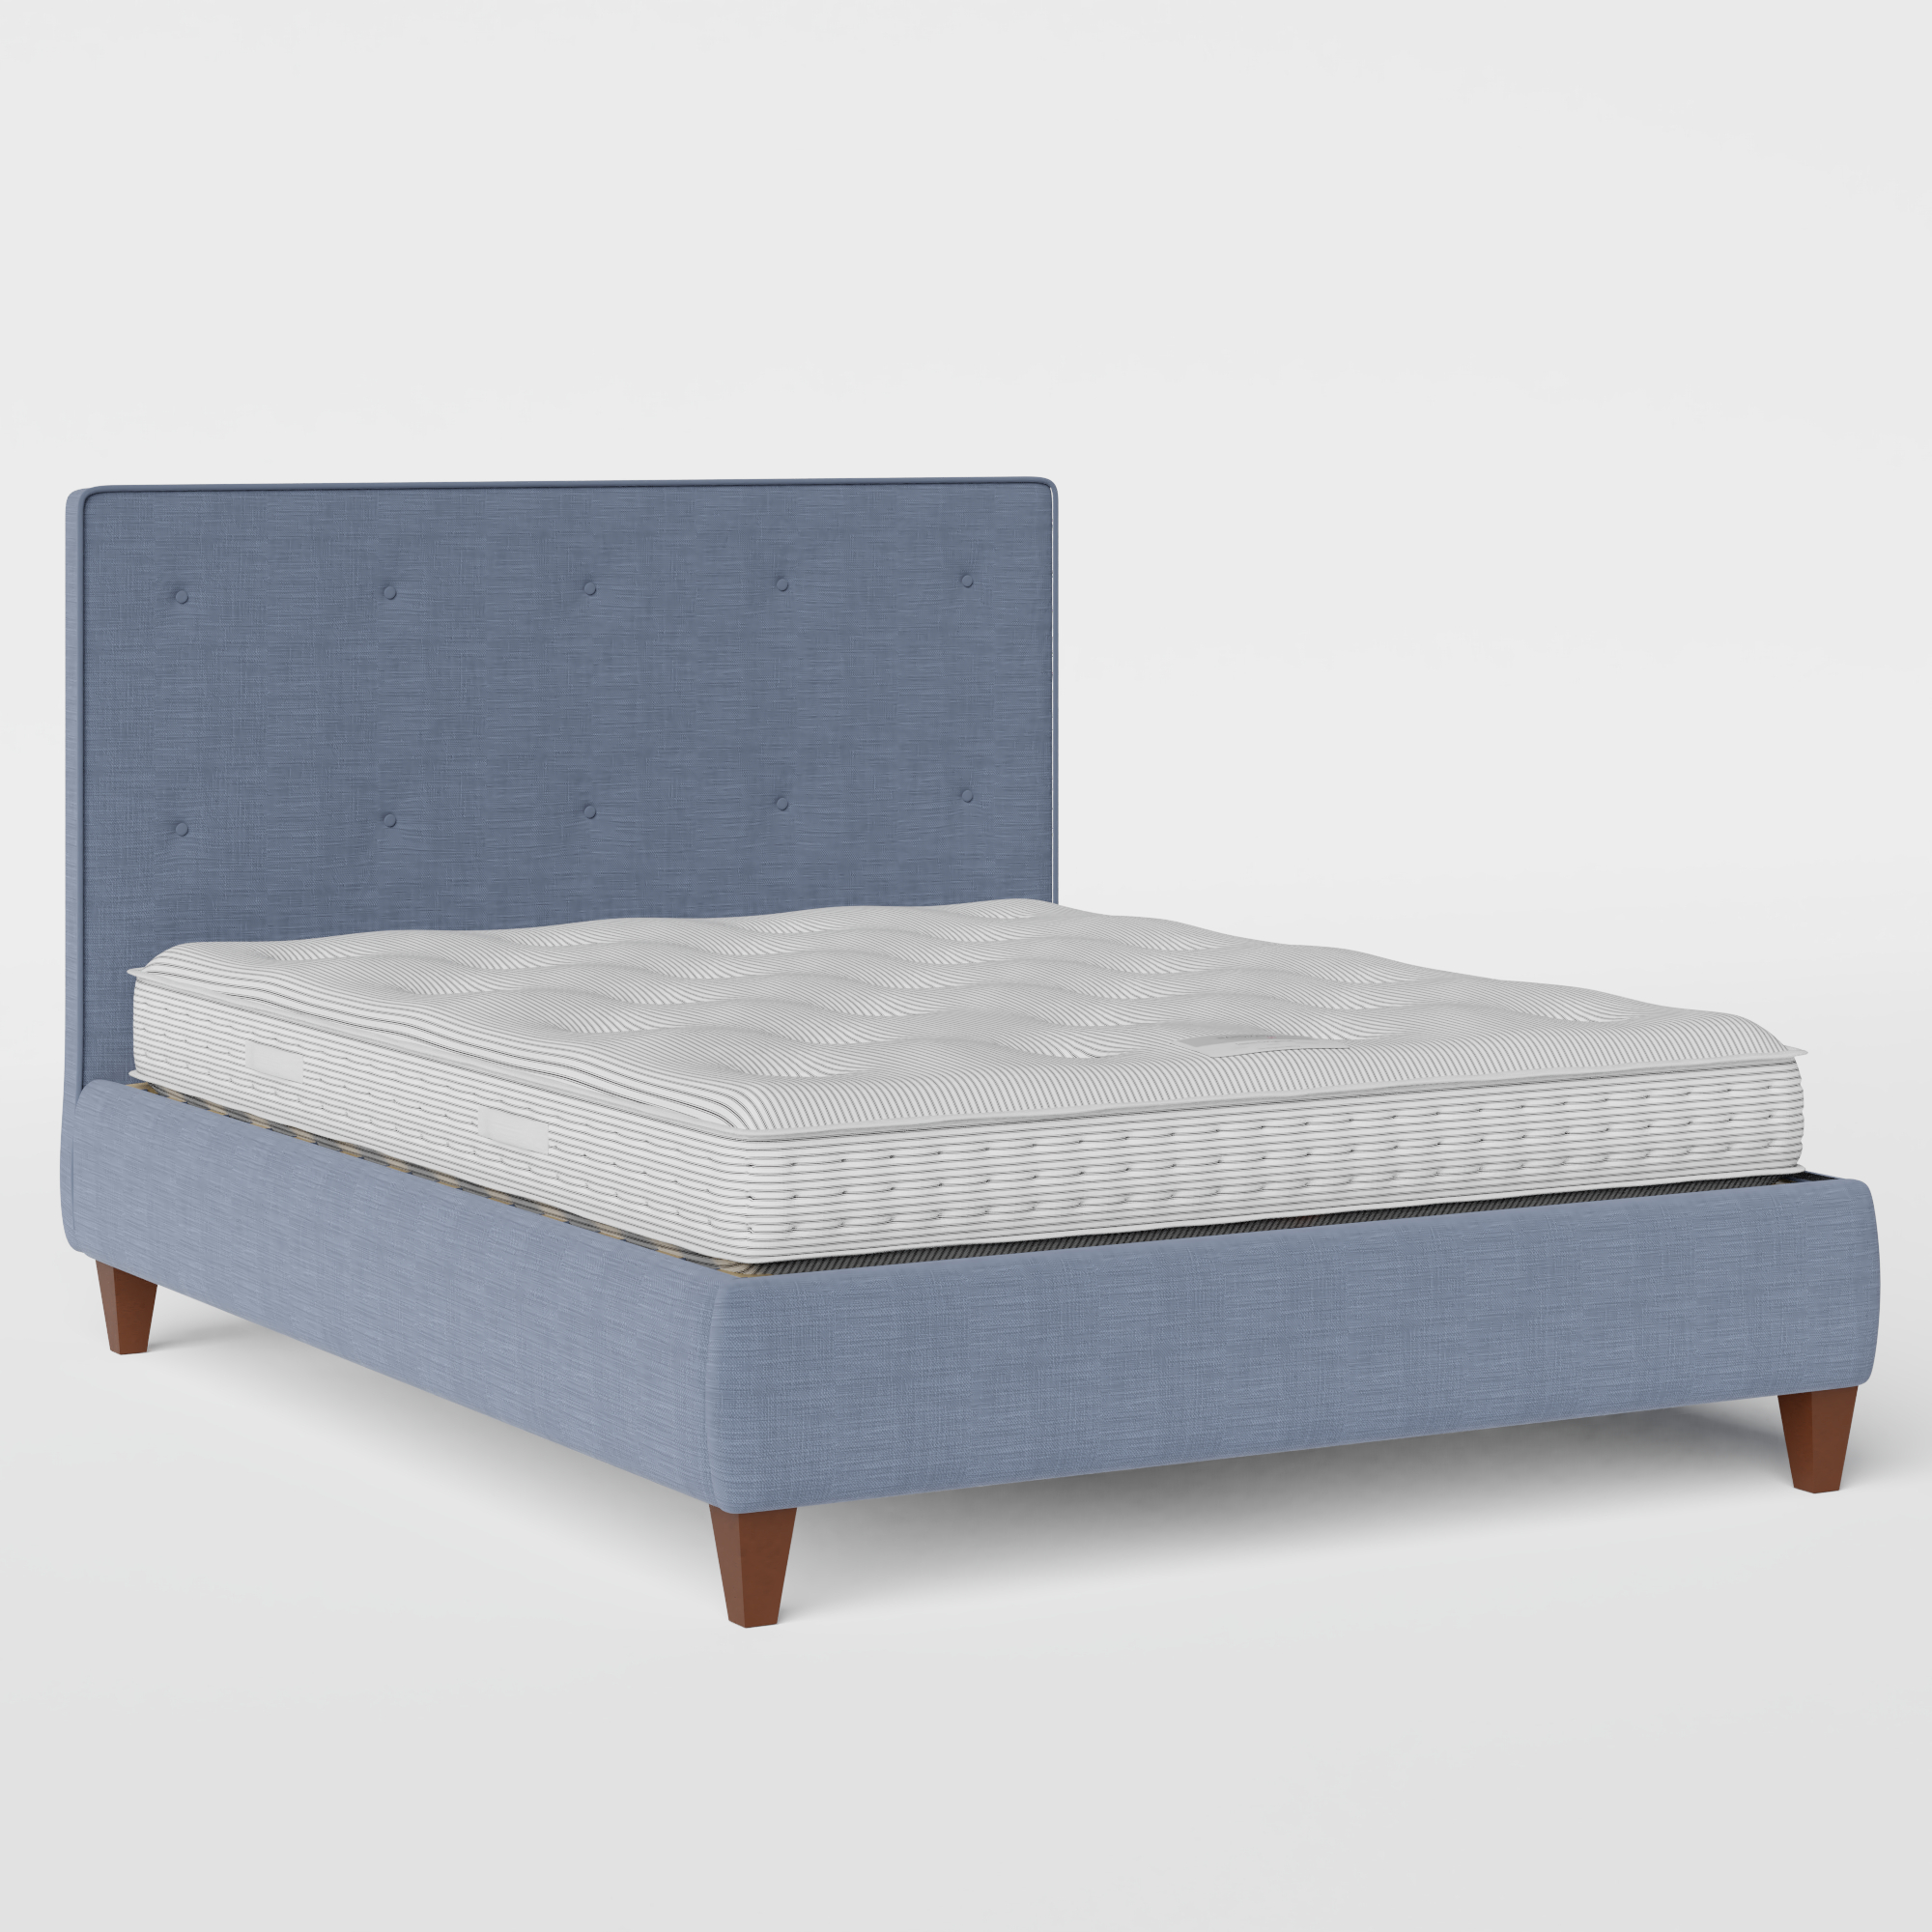 Yushan Buttoned upholstered bed in blue fabric